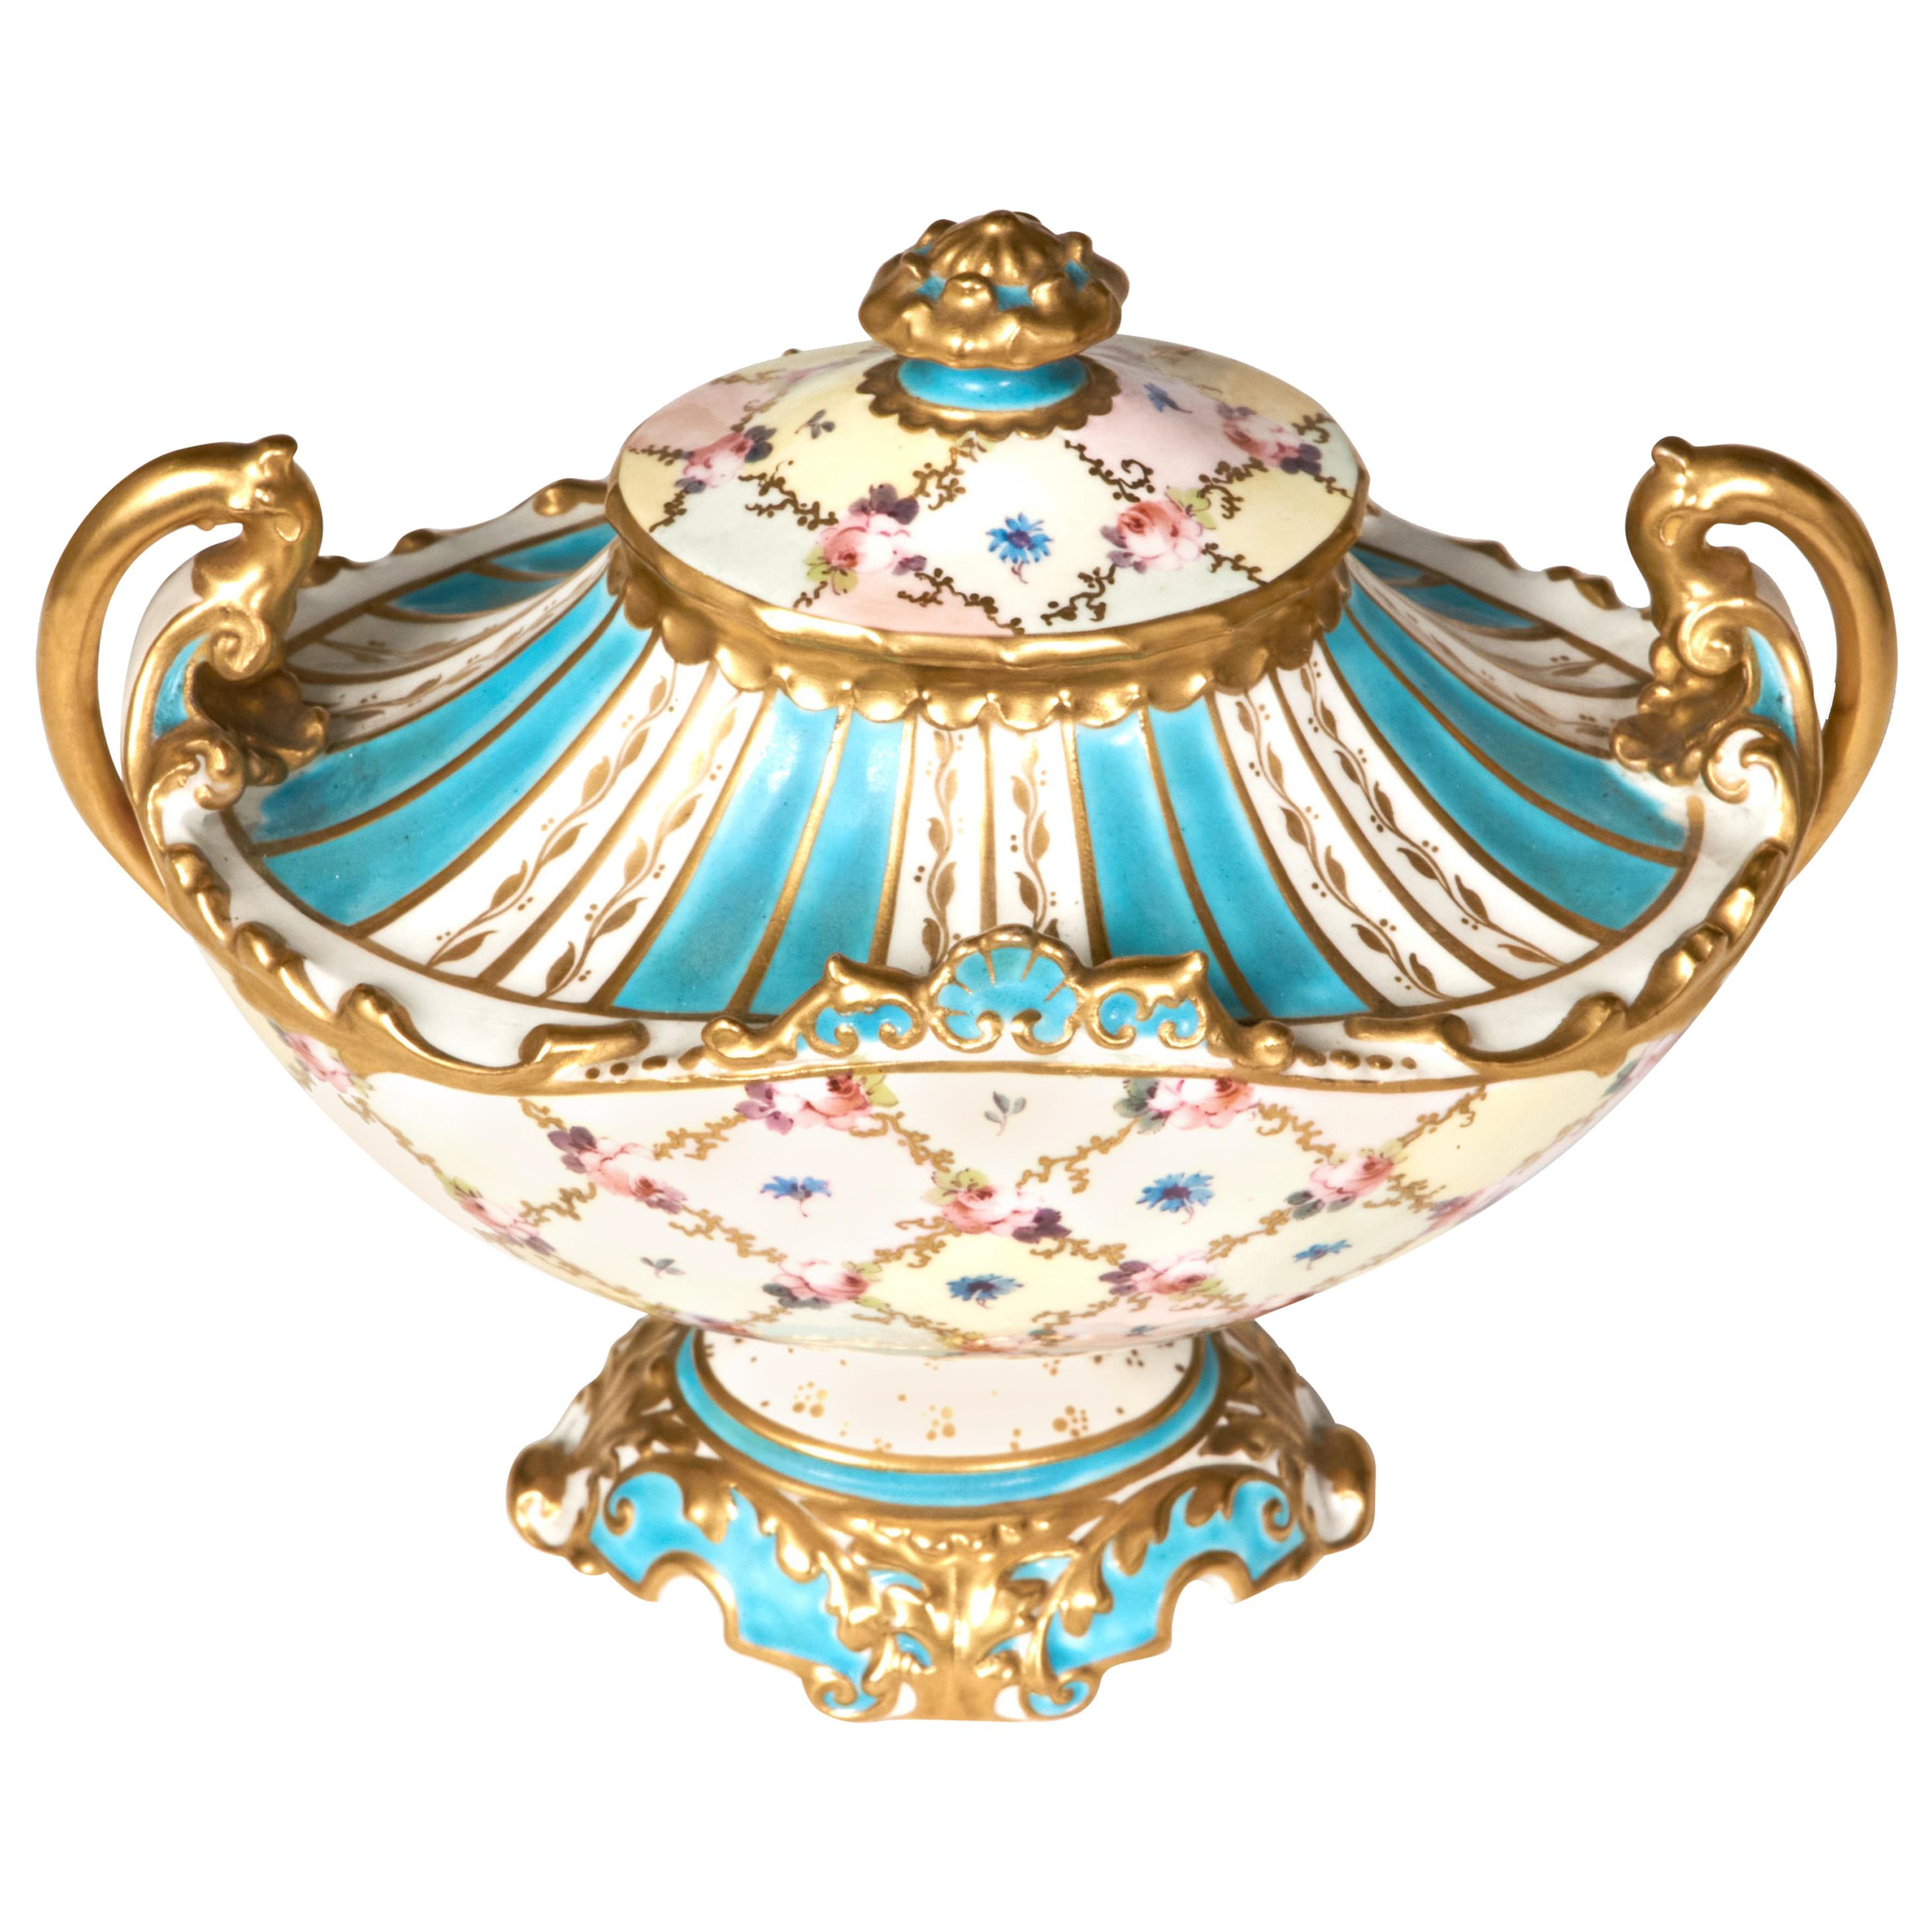 Rare 1907 Hand Painted Royal Crown Derby Covered Dish